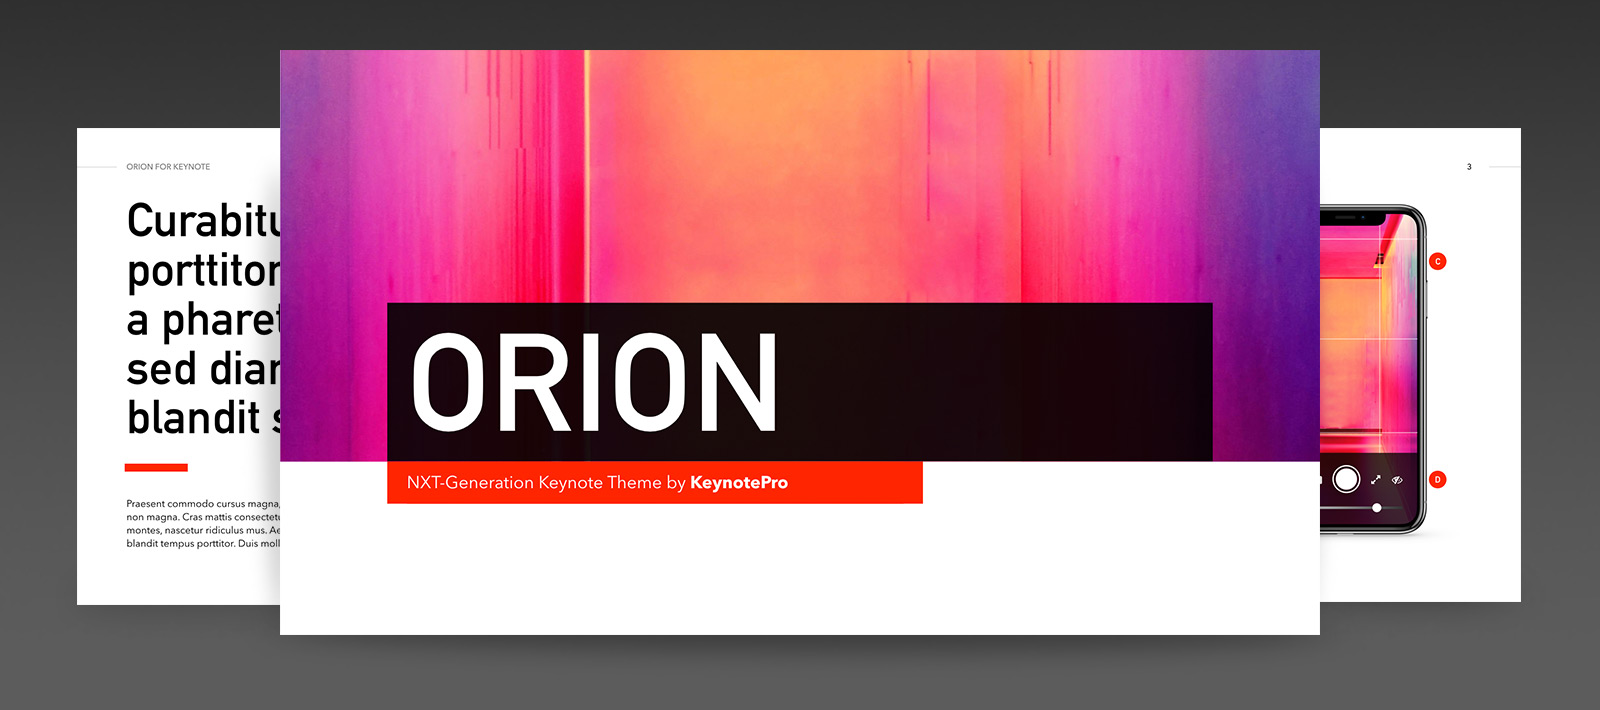 Orion (NXT) for Keynote